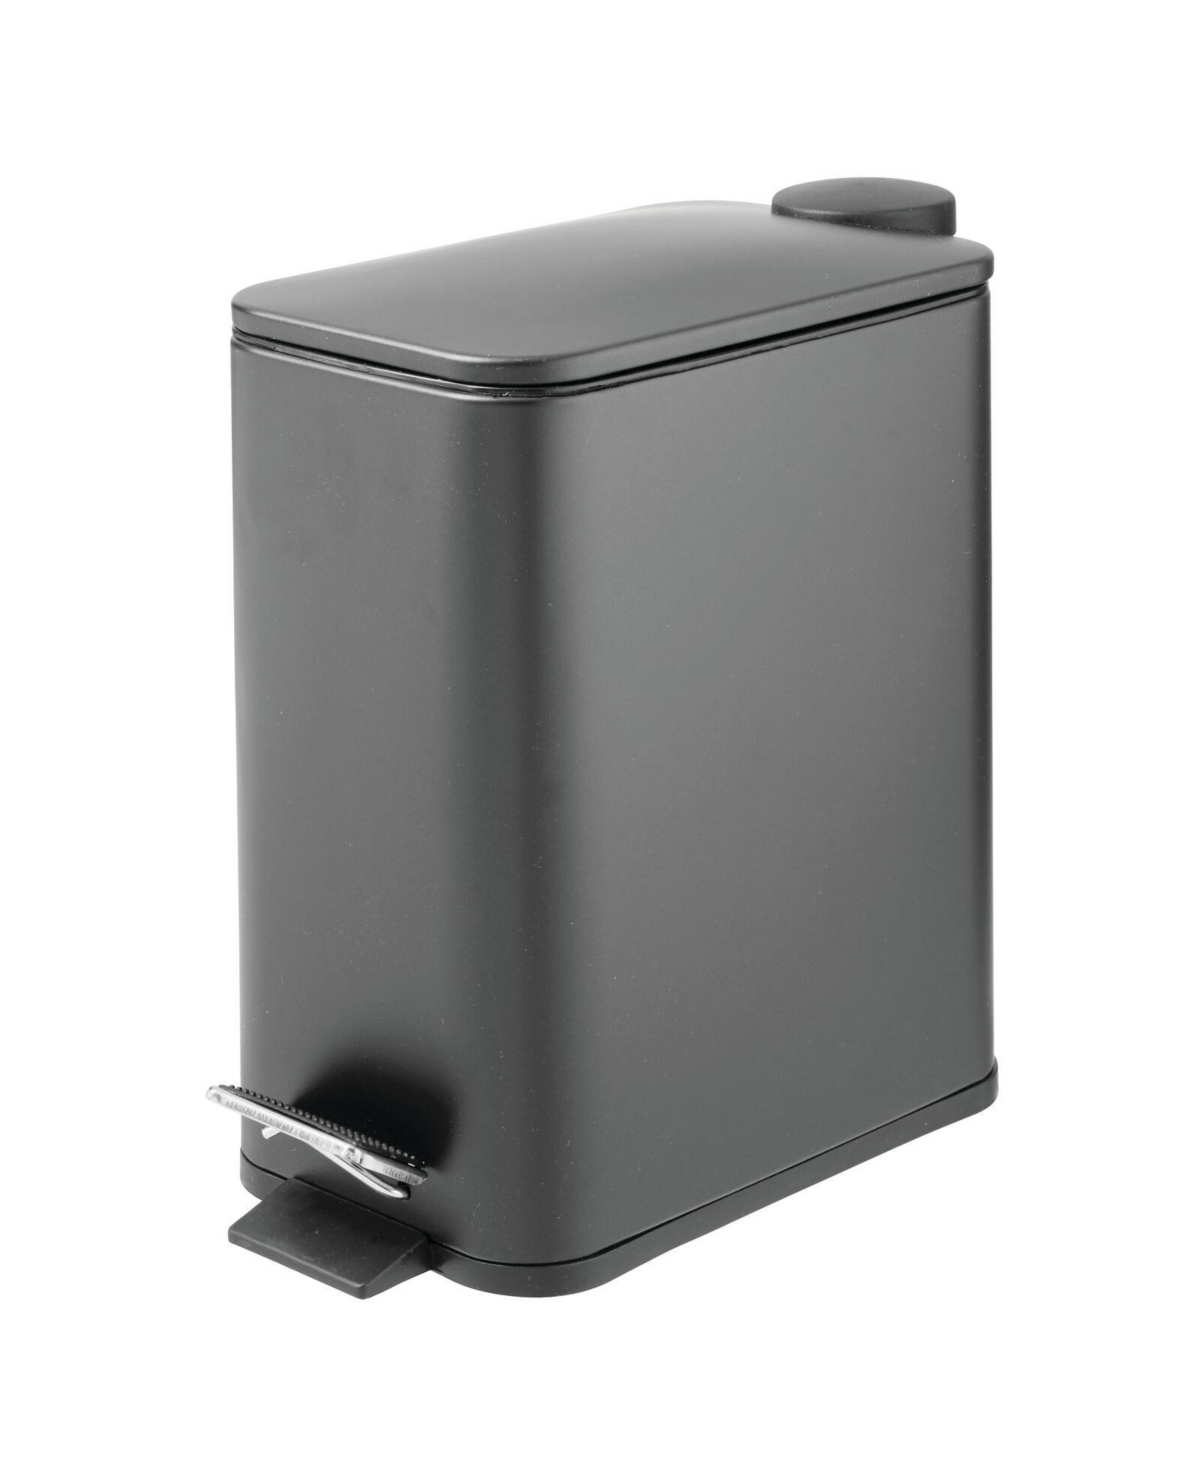 Slim Metal 1.3 Gallon Step Trash Can with Lid/Liner Bucket - Dark Gray - Charcoal